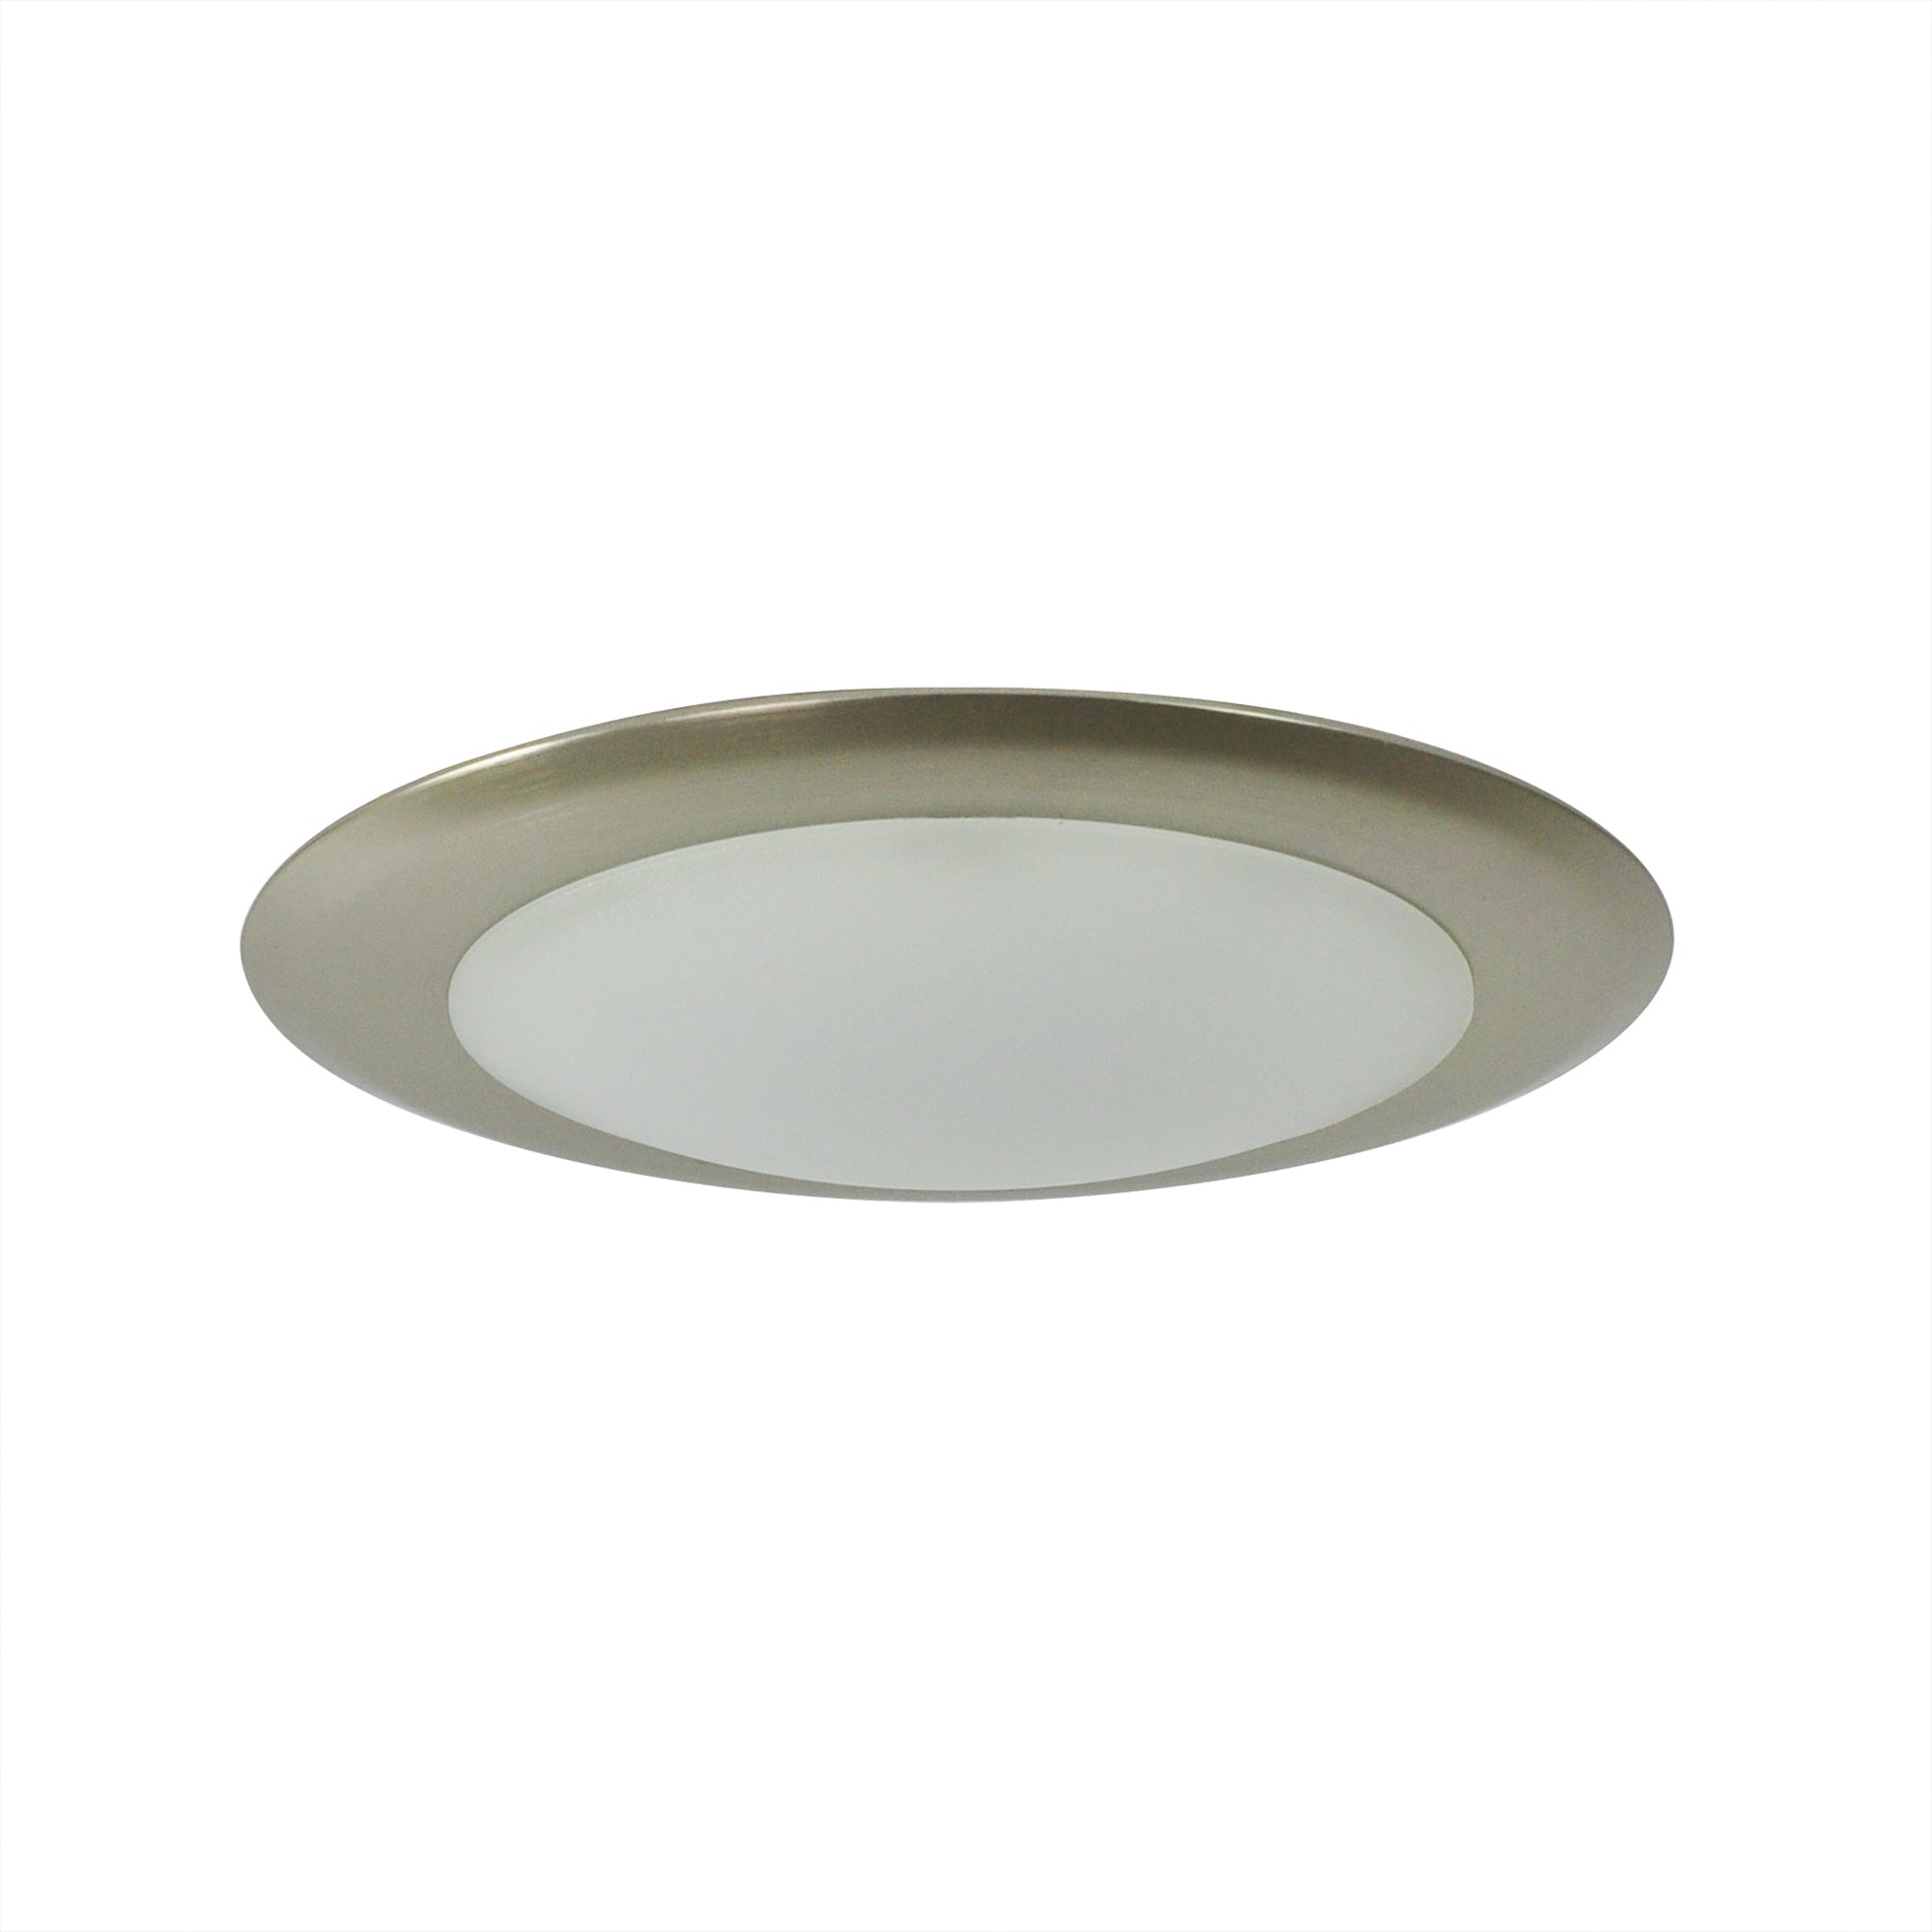 Nora Lighting NLOPAC-R6509T2440NM - Surface - 6 Inch AC Opal LED Surface Mount, 1150lm / 16.5W, 4000K, Natural Metal finish